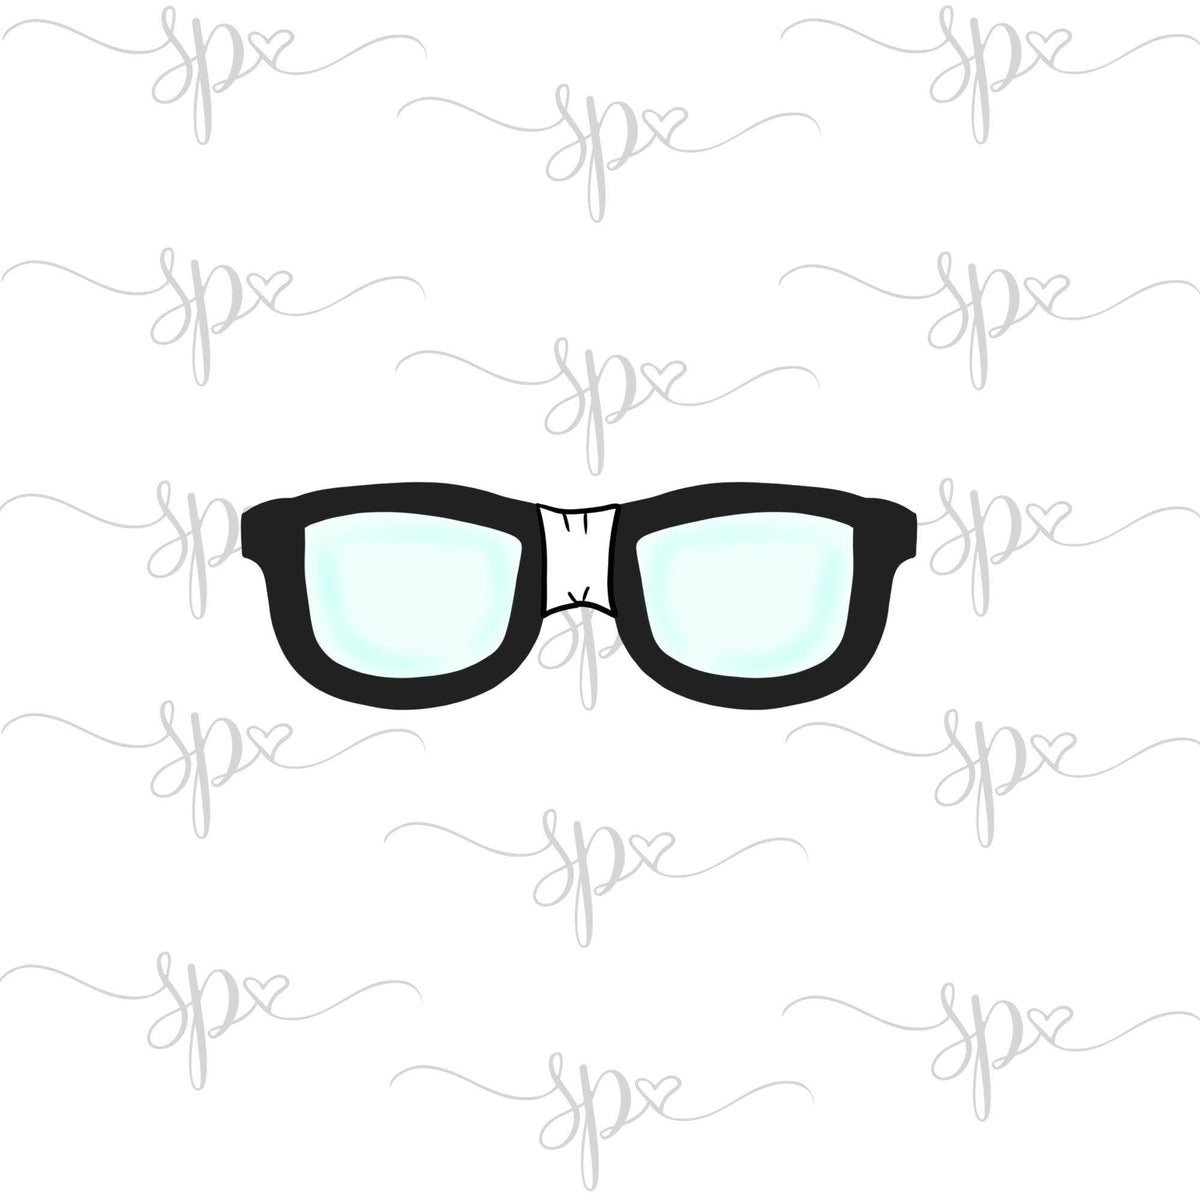 Hipster Glasses Cookie Cutter - Sweetleigh 